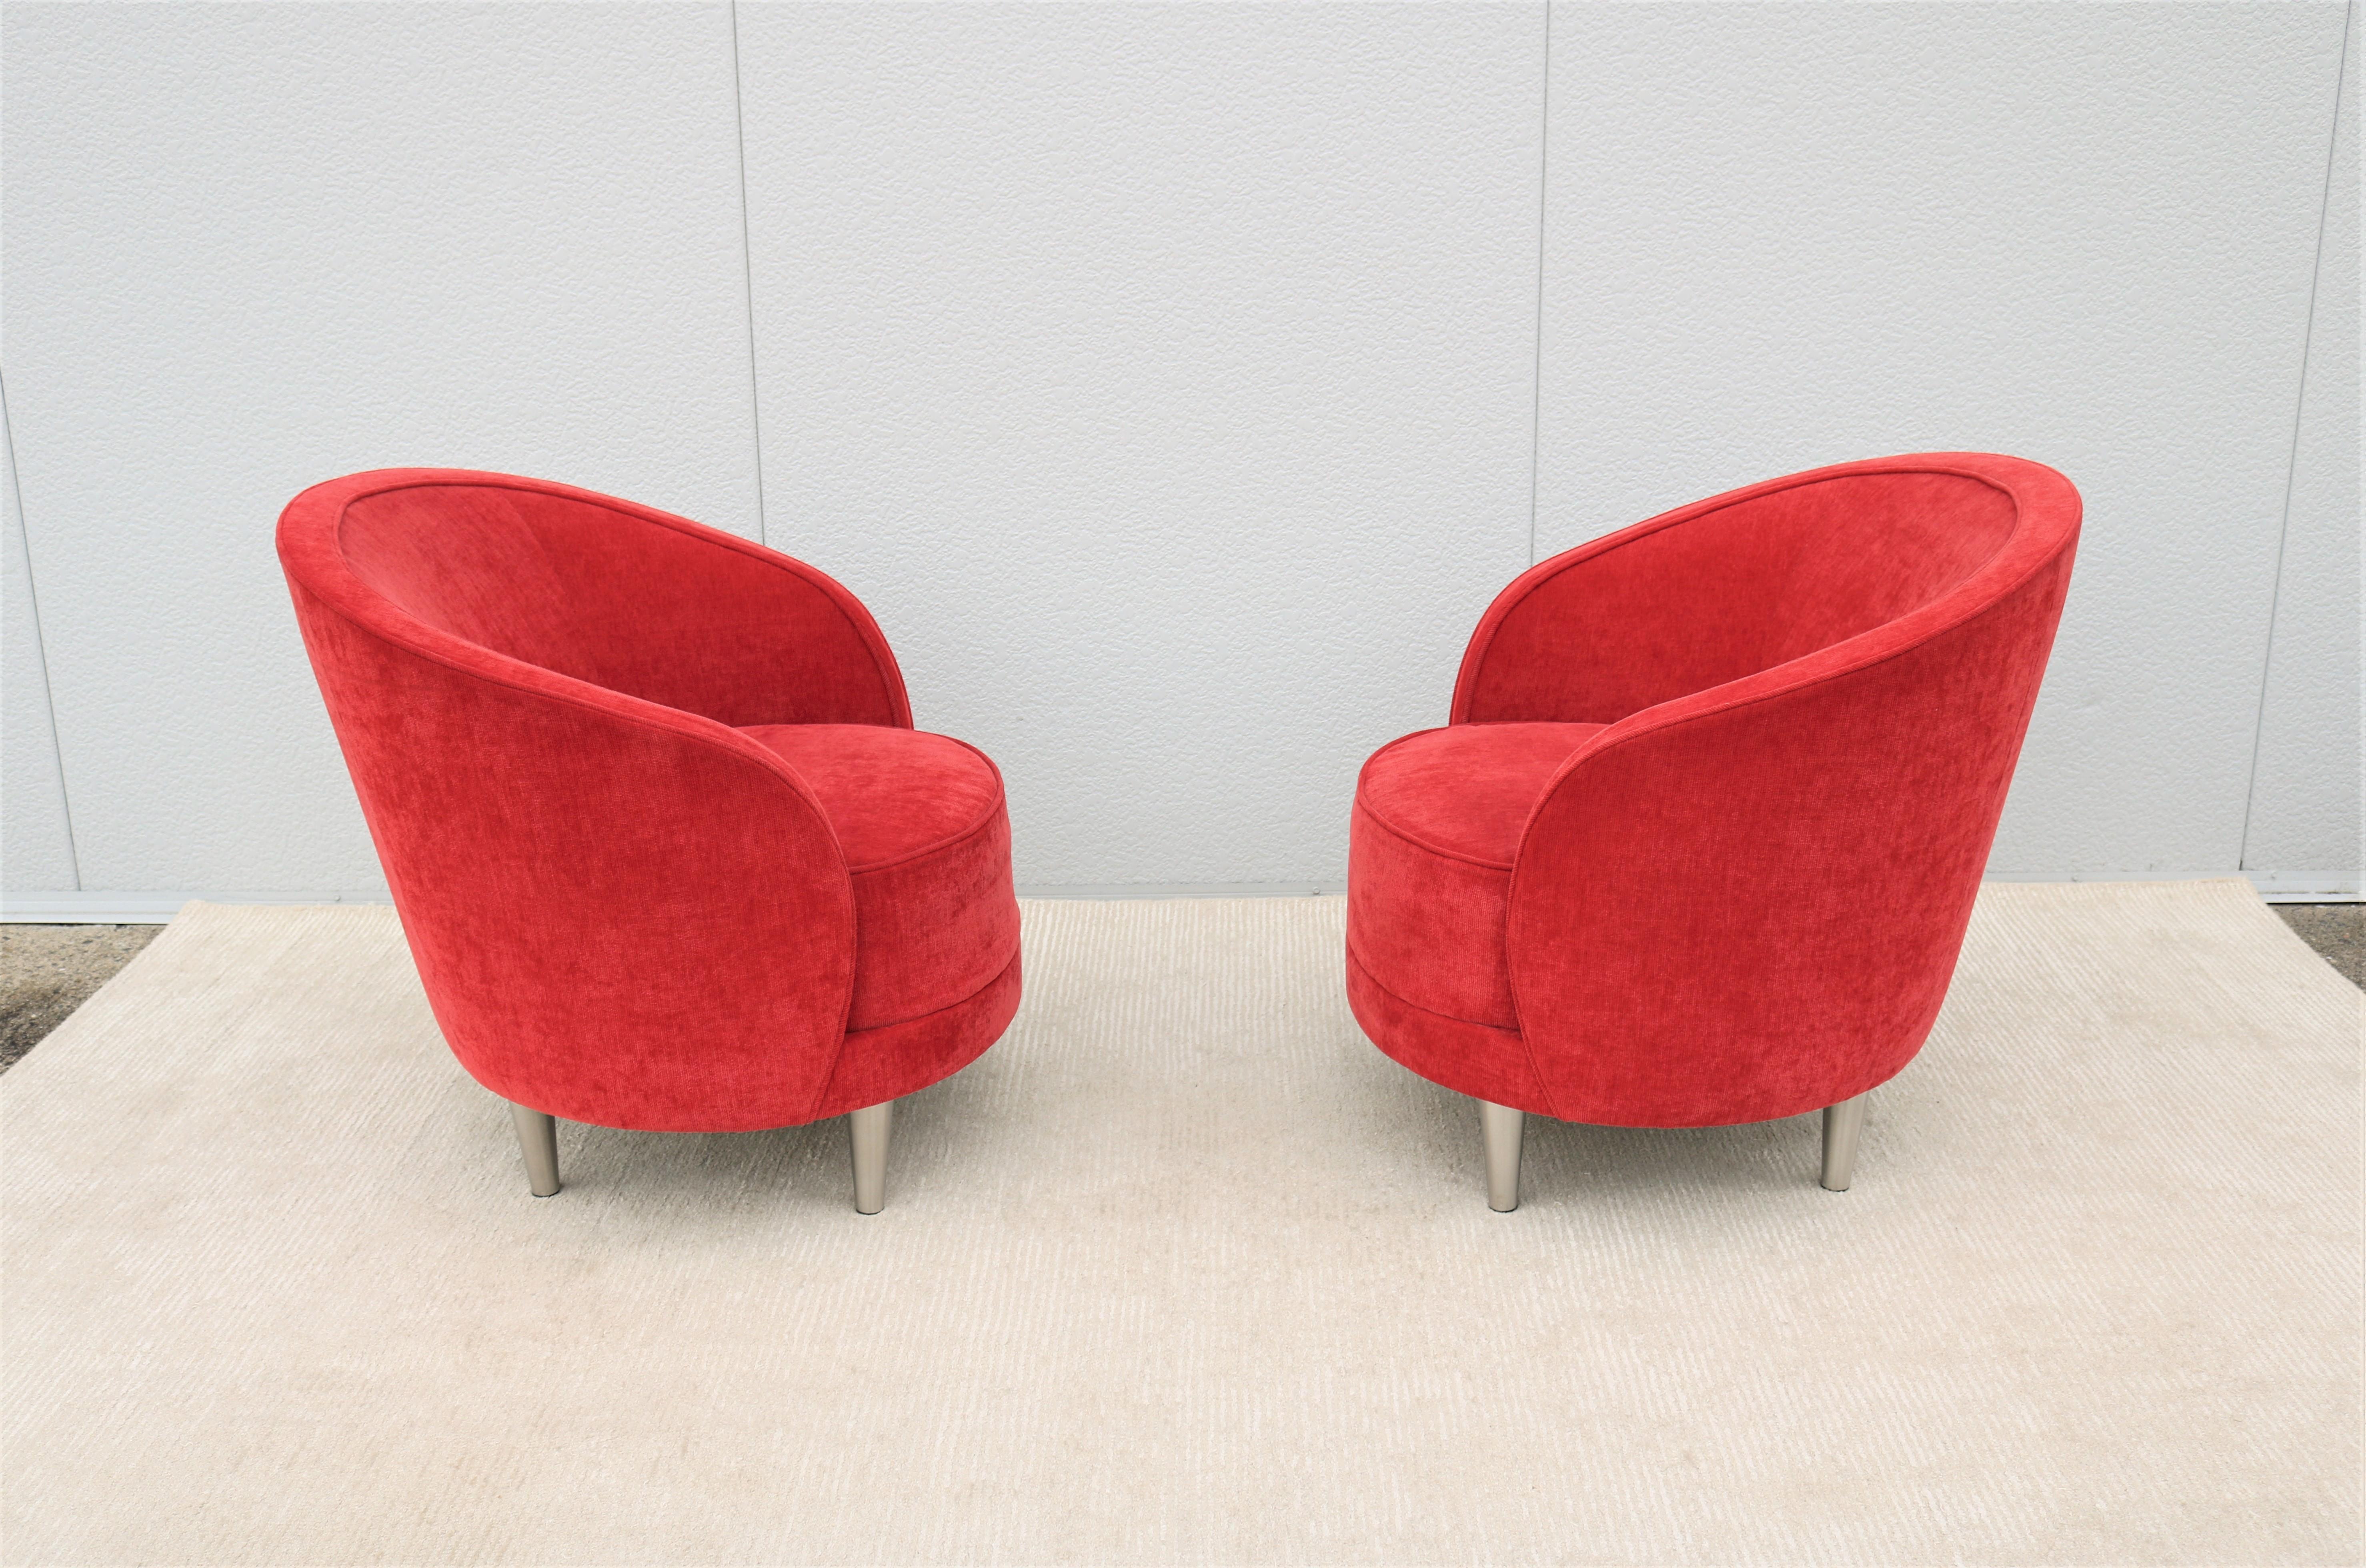 Contemporary Modern Martin Brattrud Kinsale Red Barrel Lounge Chairs, a Pair For Sale 3